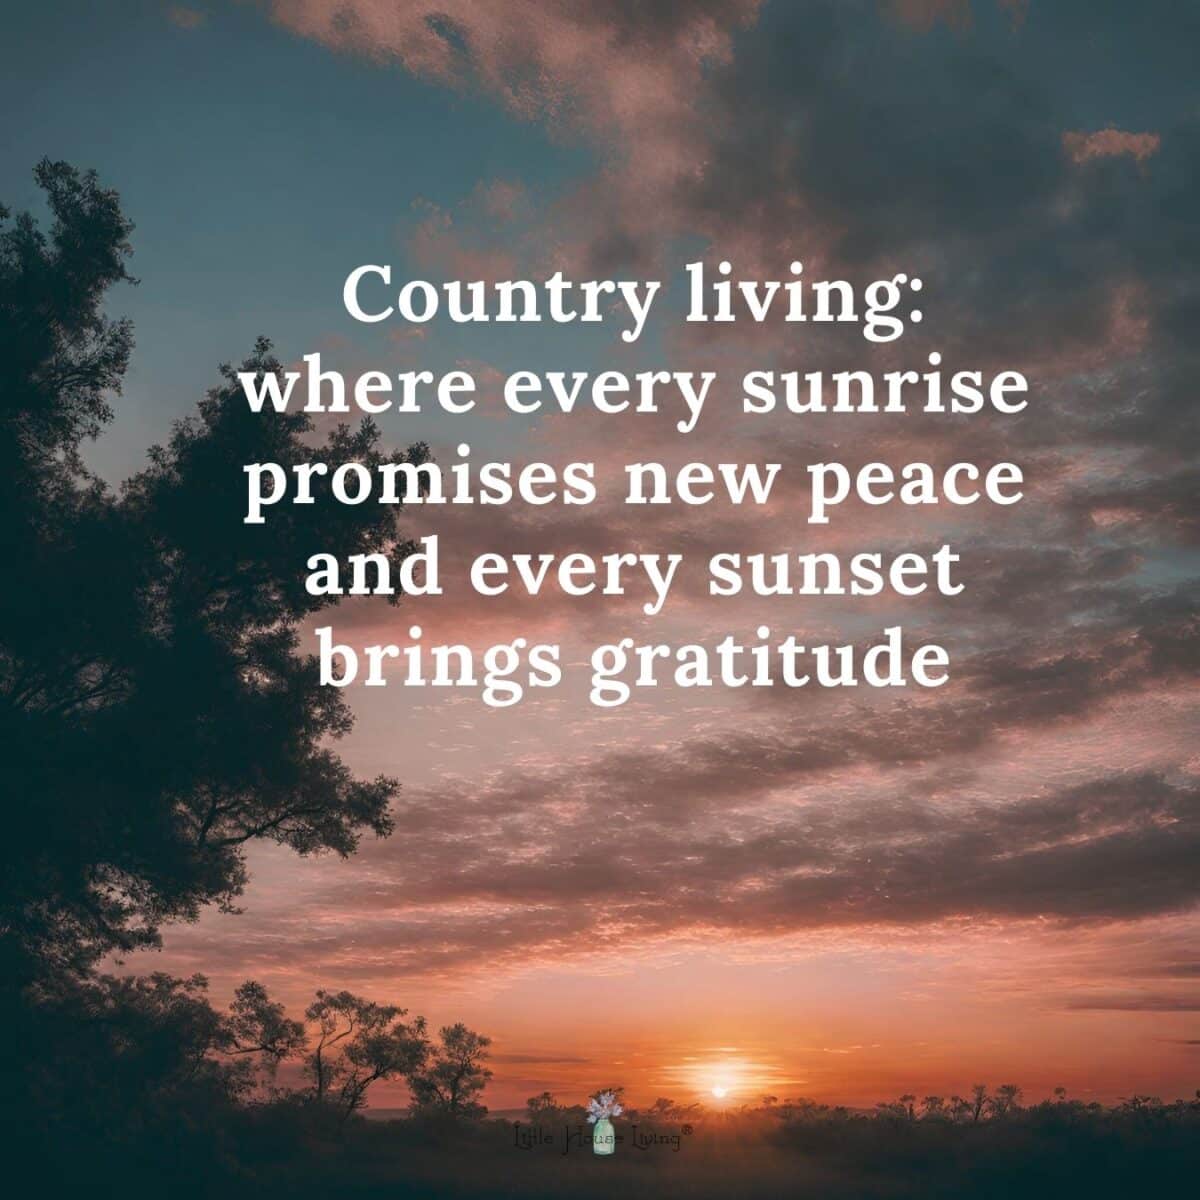 Country living: 
where every sunrise promises new peace and every sunset brings gratitude